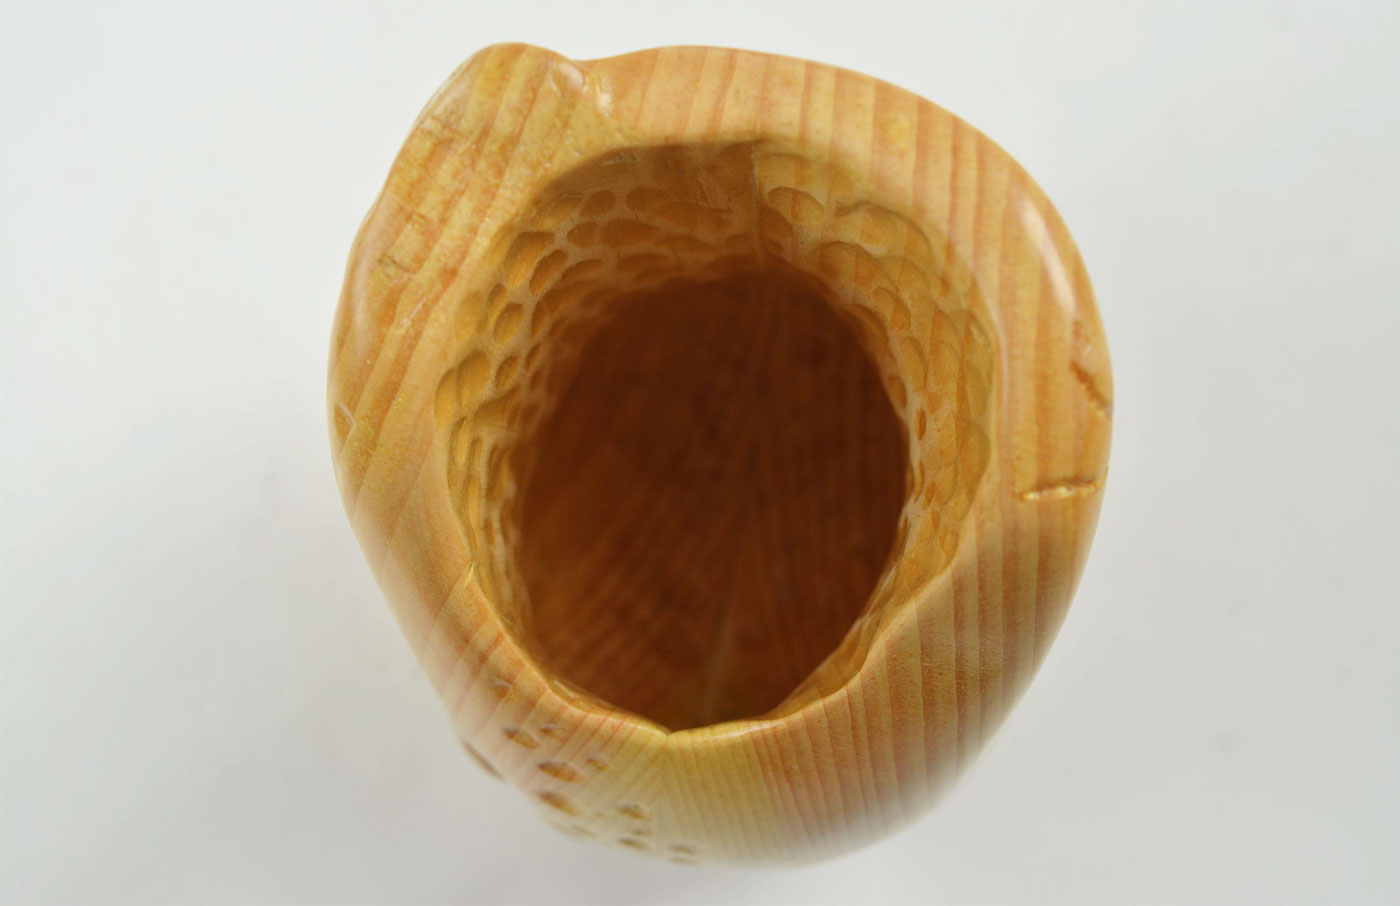 wood wood 1 Vase handcrafting carving product wood working 